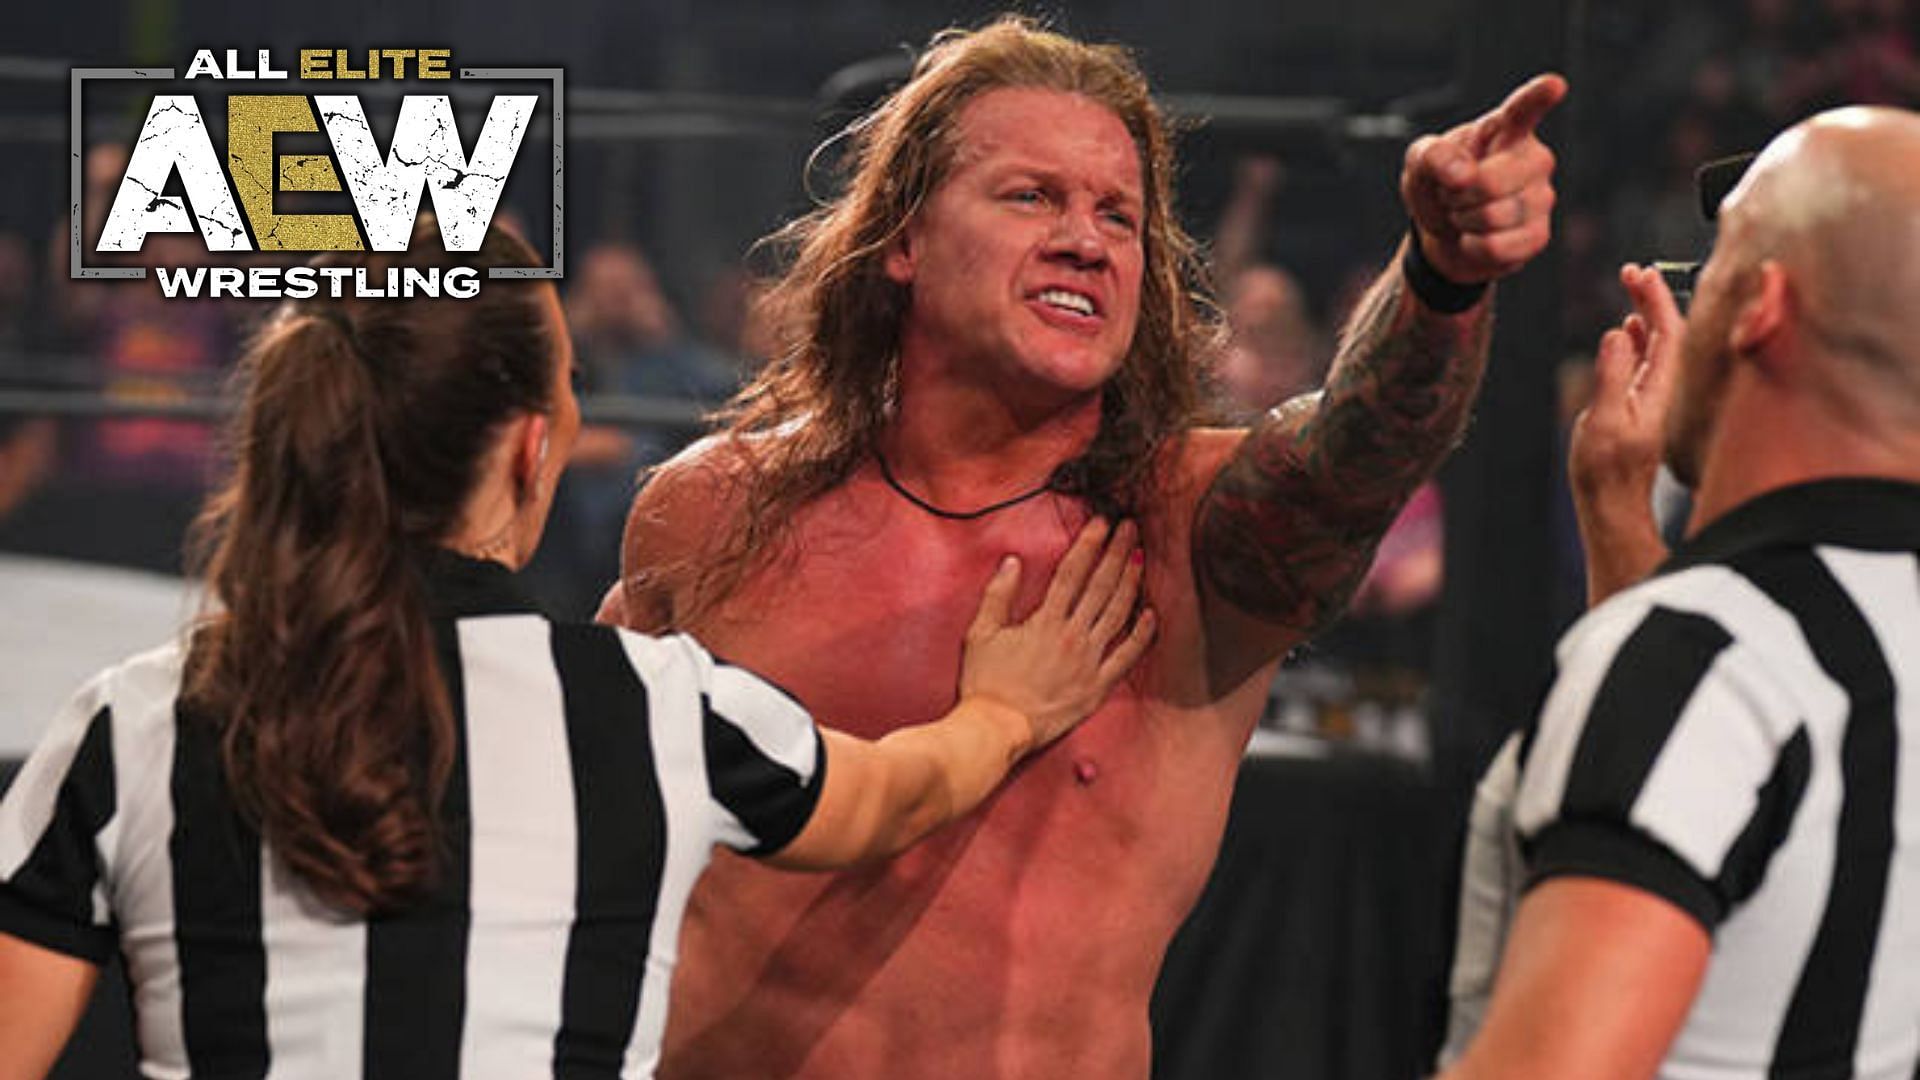 Chris Jericho had some harsh words this week